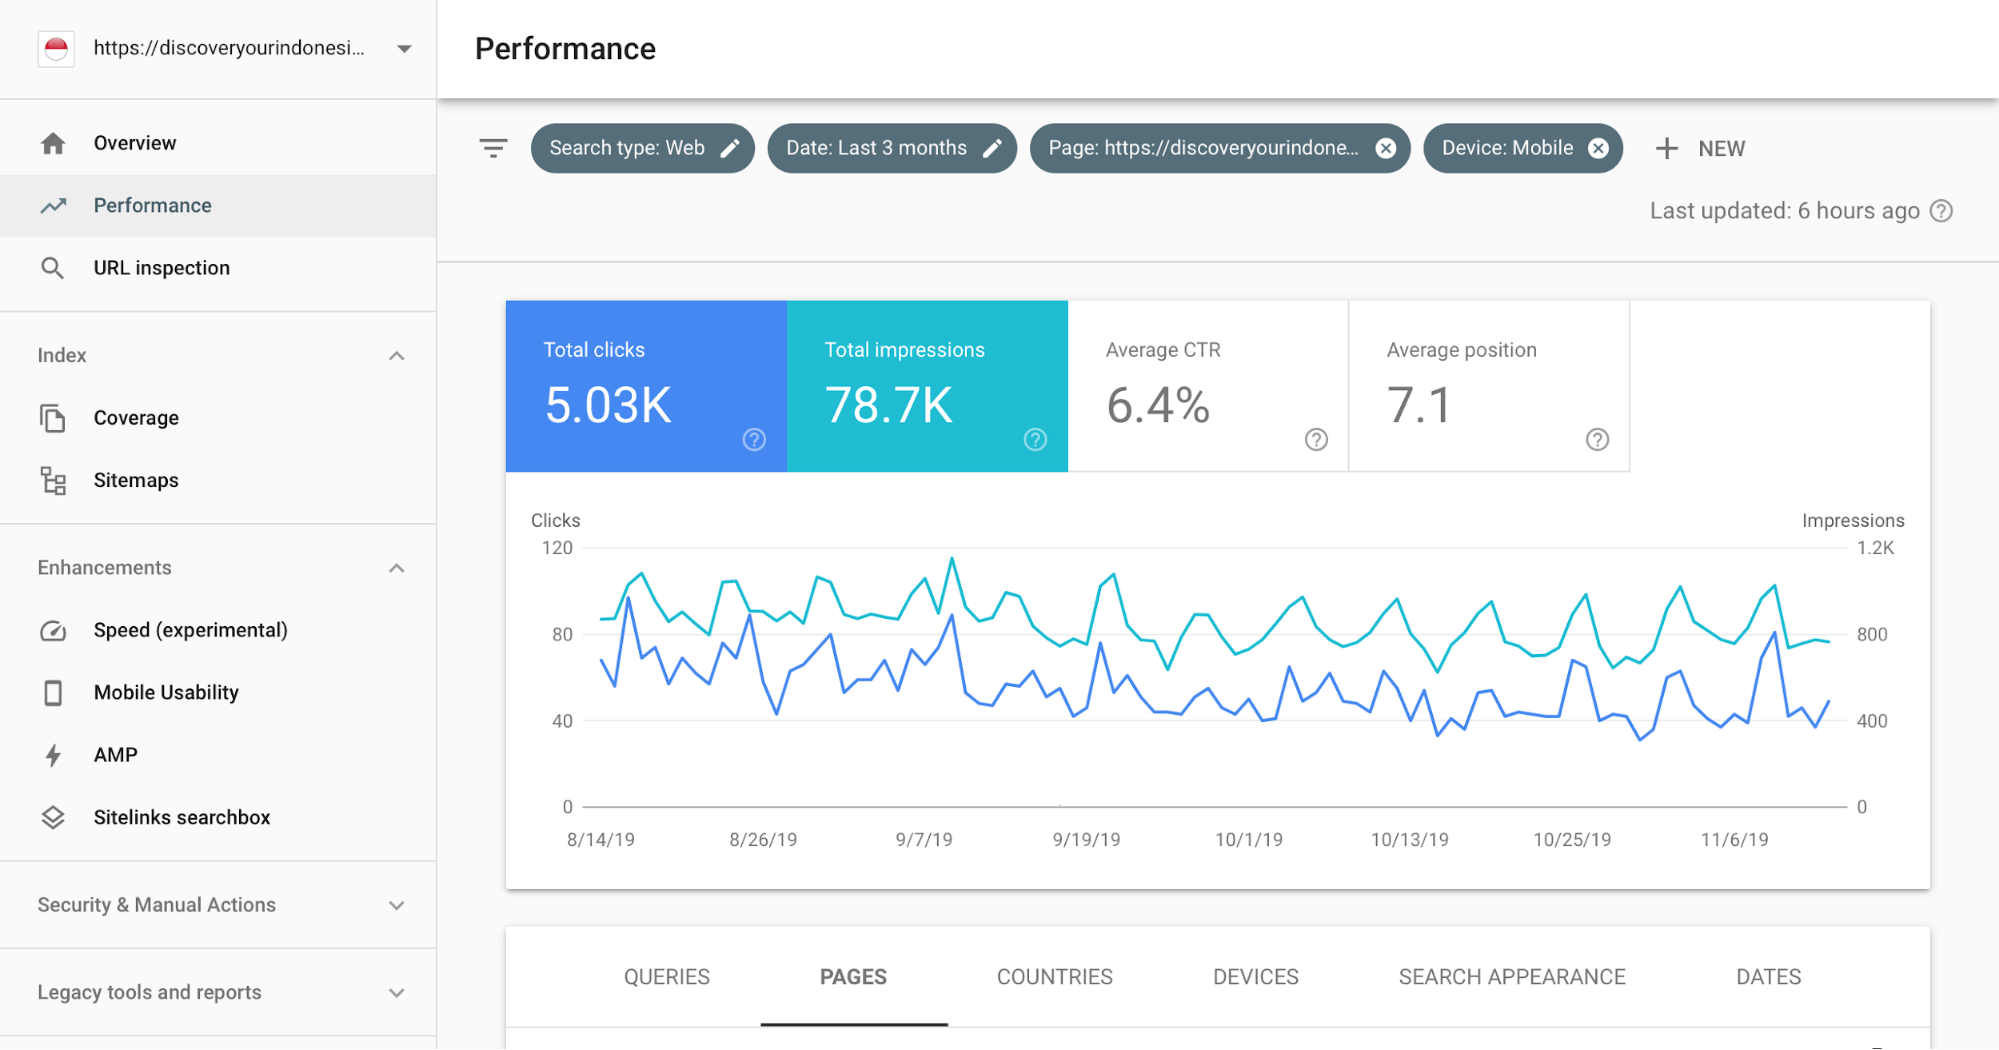 Compare performance across devices 